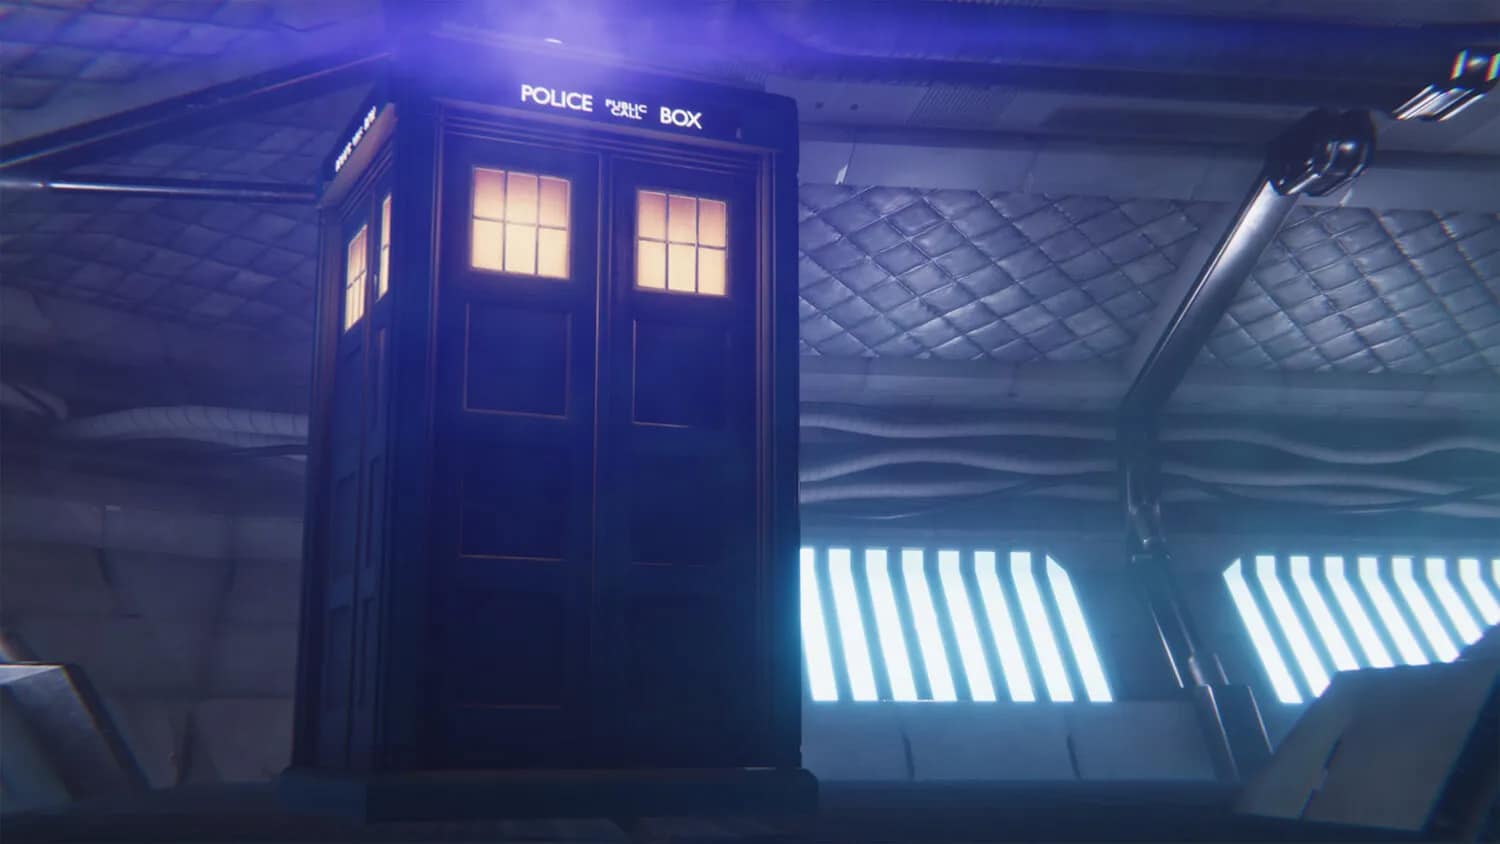 doctor who video games should be more about monsters than the boring doctor who usually cannot come to harm